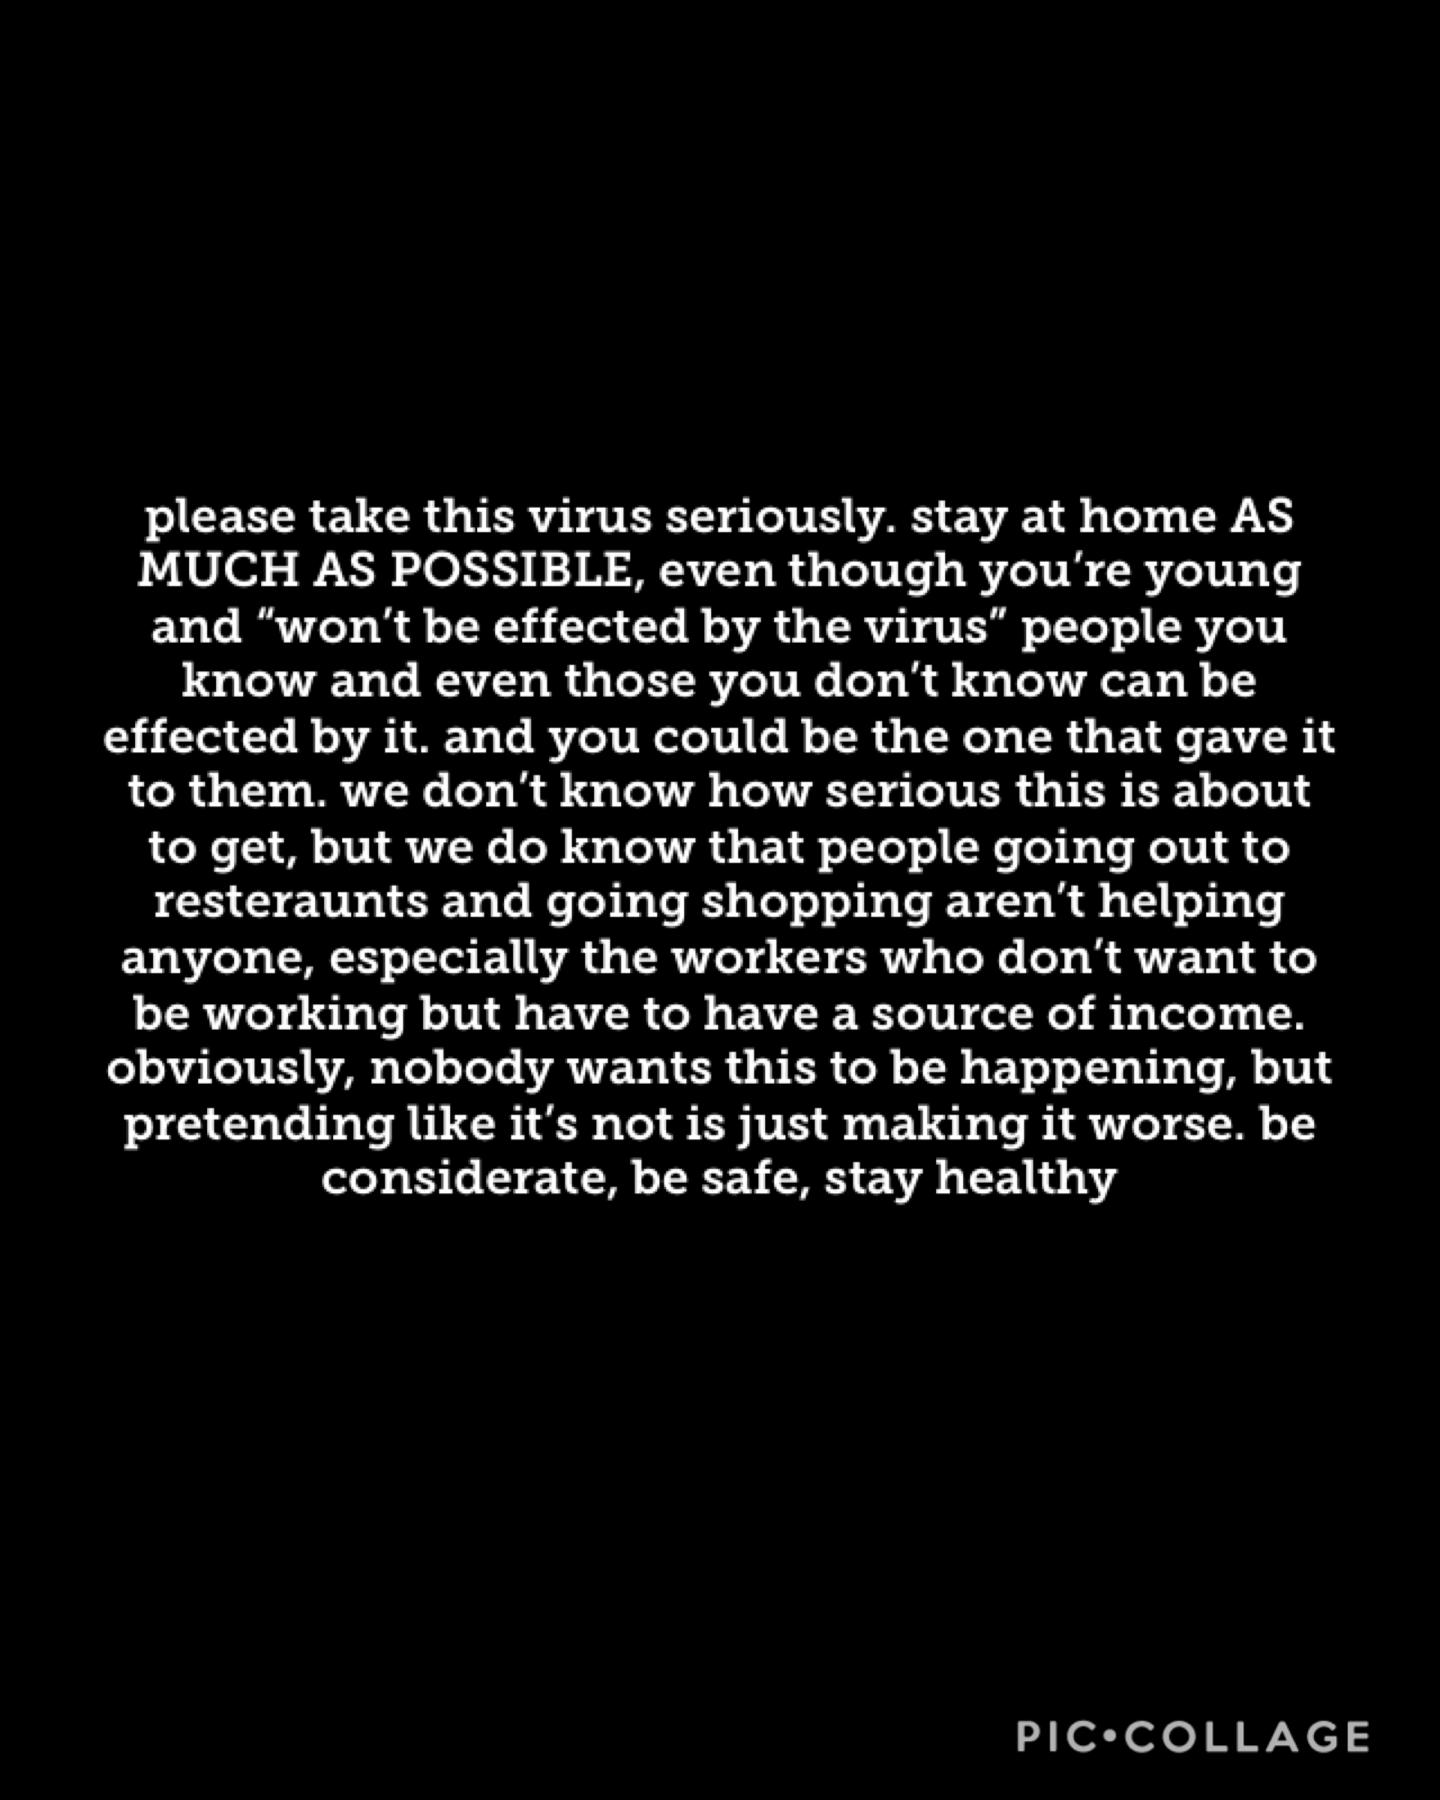 stay strong, we can get through this if we take it seriously. it’s not a joke, it’s here, it’s happening. even though it’s hard, try to stay positive, stress and negativity won’t help you or anyone around you. if you guys need someone to talk to, I’m here